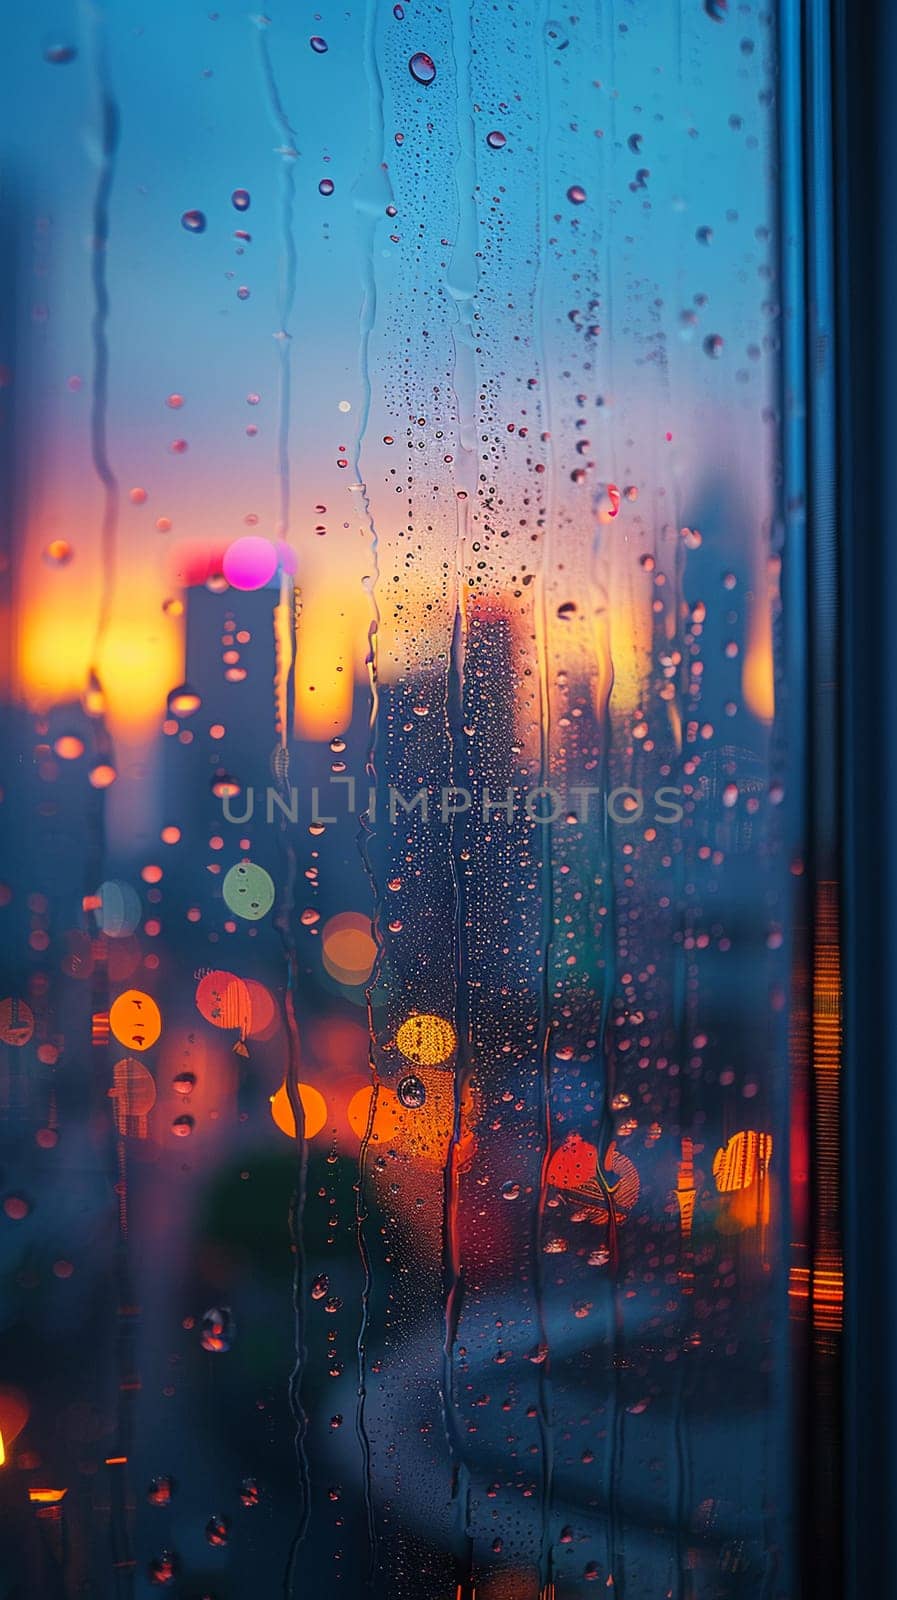 Raindrops on Window with Abstract Cityscape Reflection, The blurring effect of rain on glass merges with city contours, depicting weather's influence on urban life.